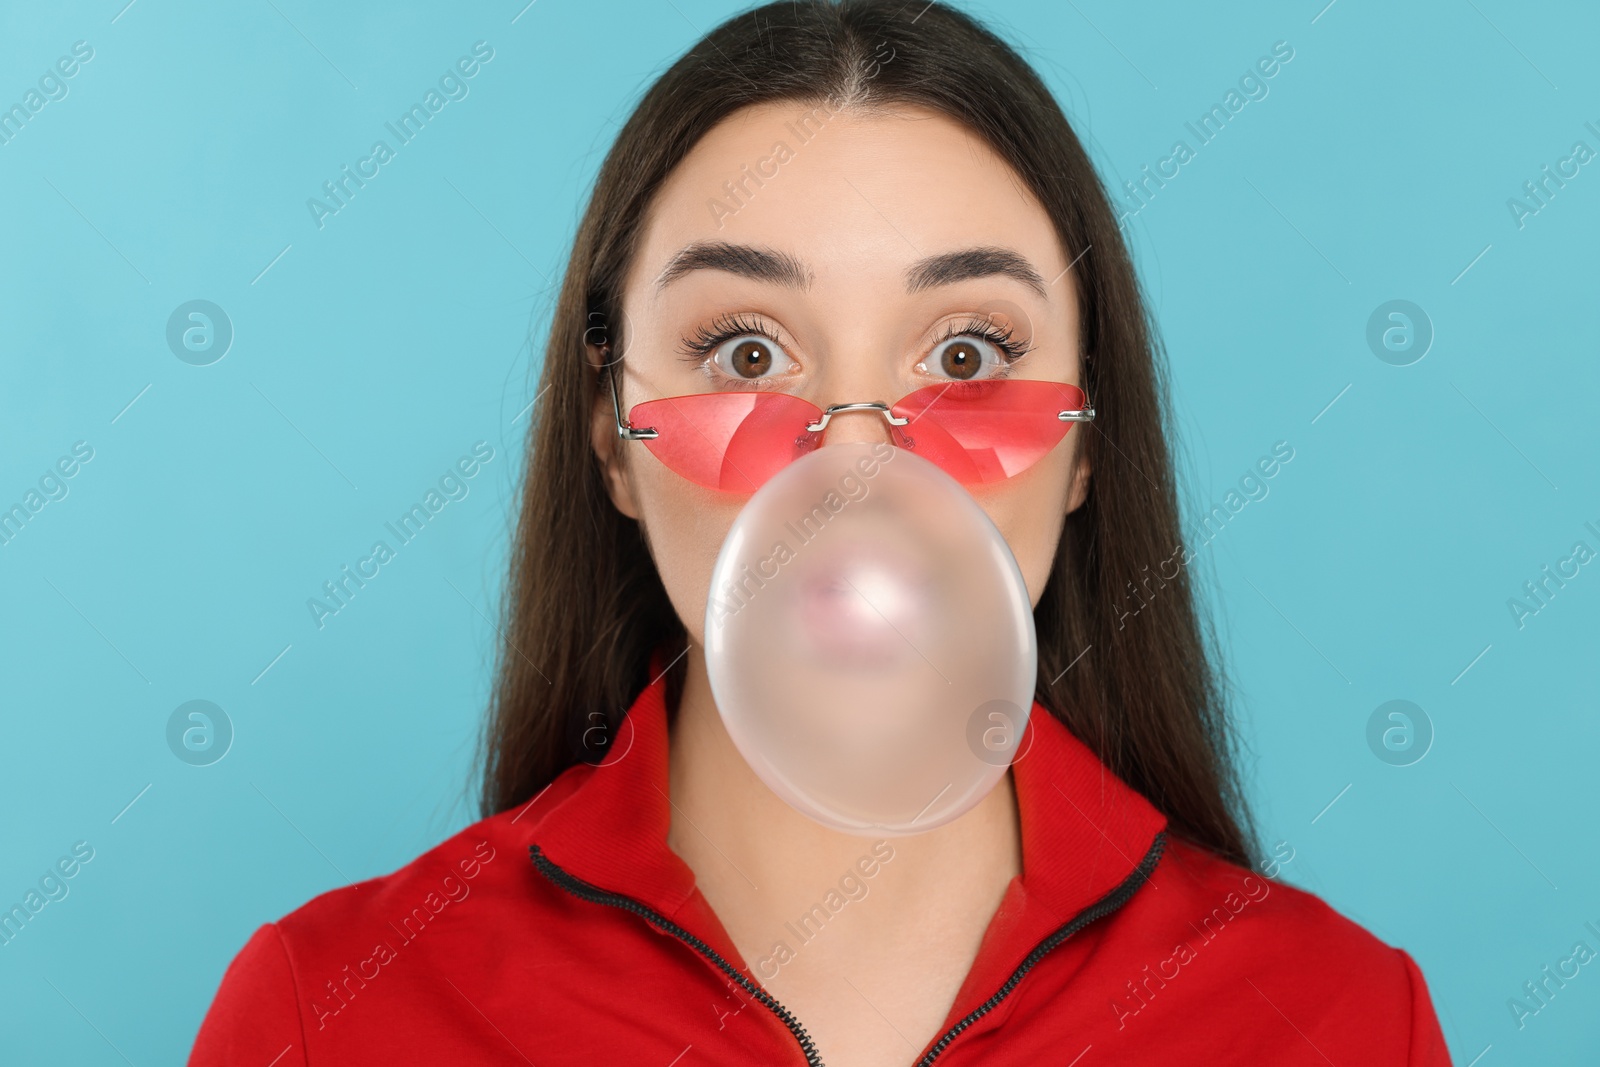 Photo of Beautiful young woman blowing bubble gum on light blue background